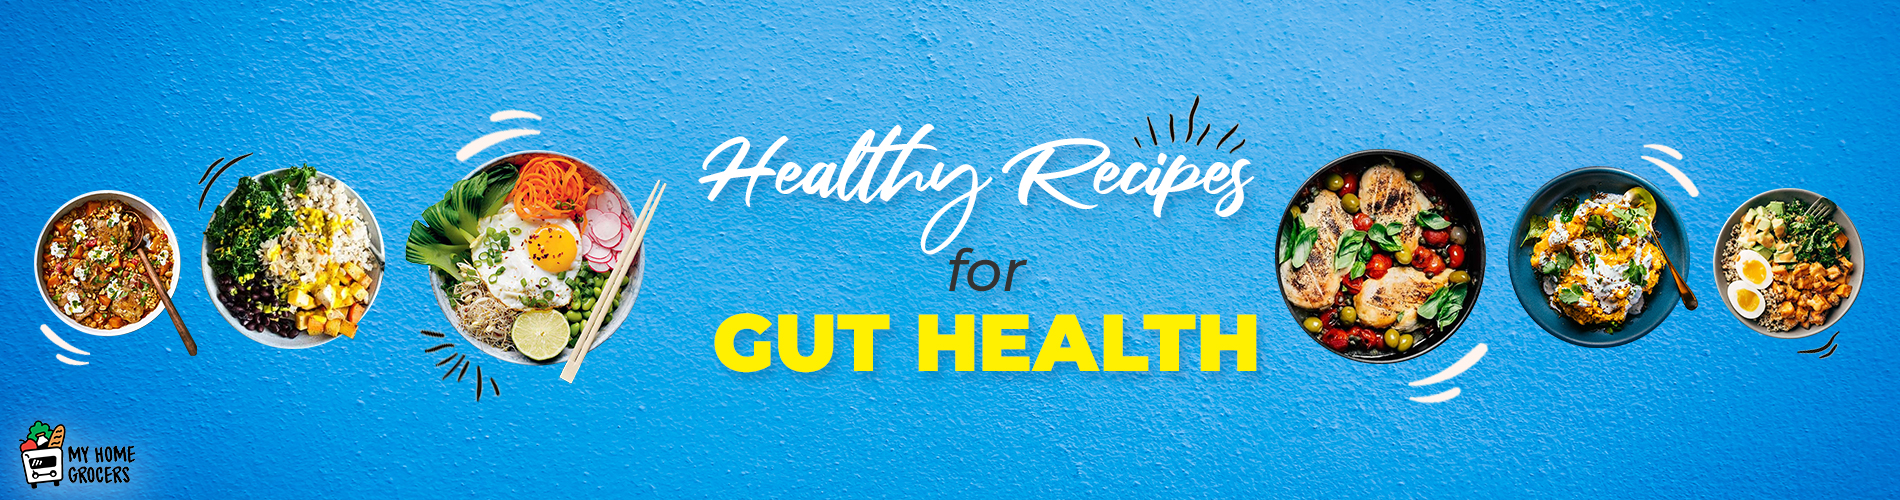 Healthy recipes for Gut Health